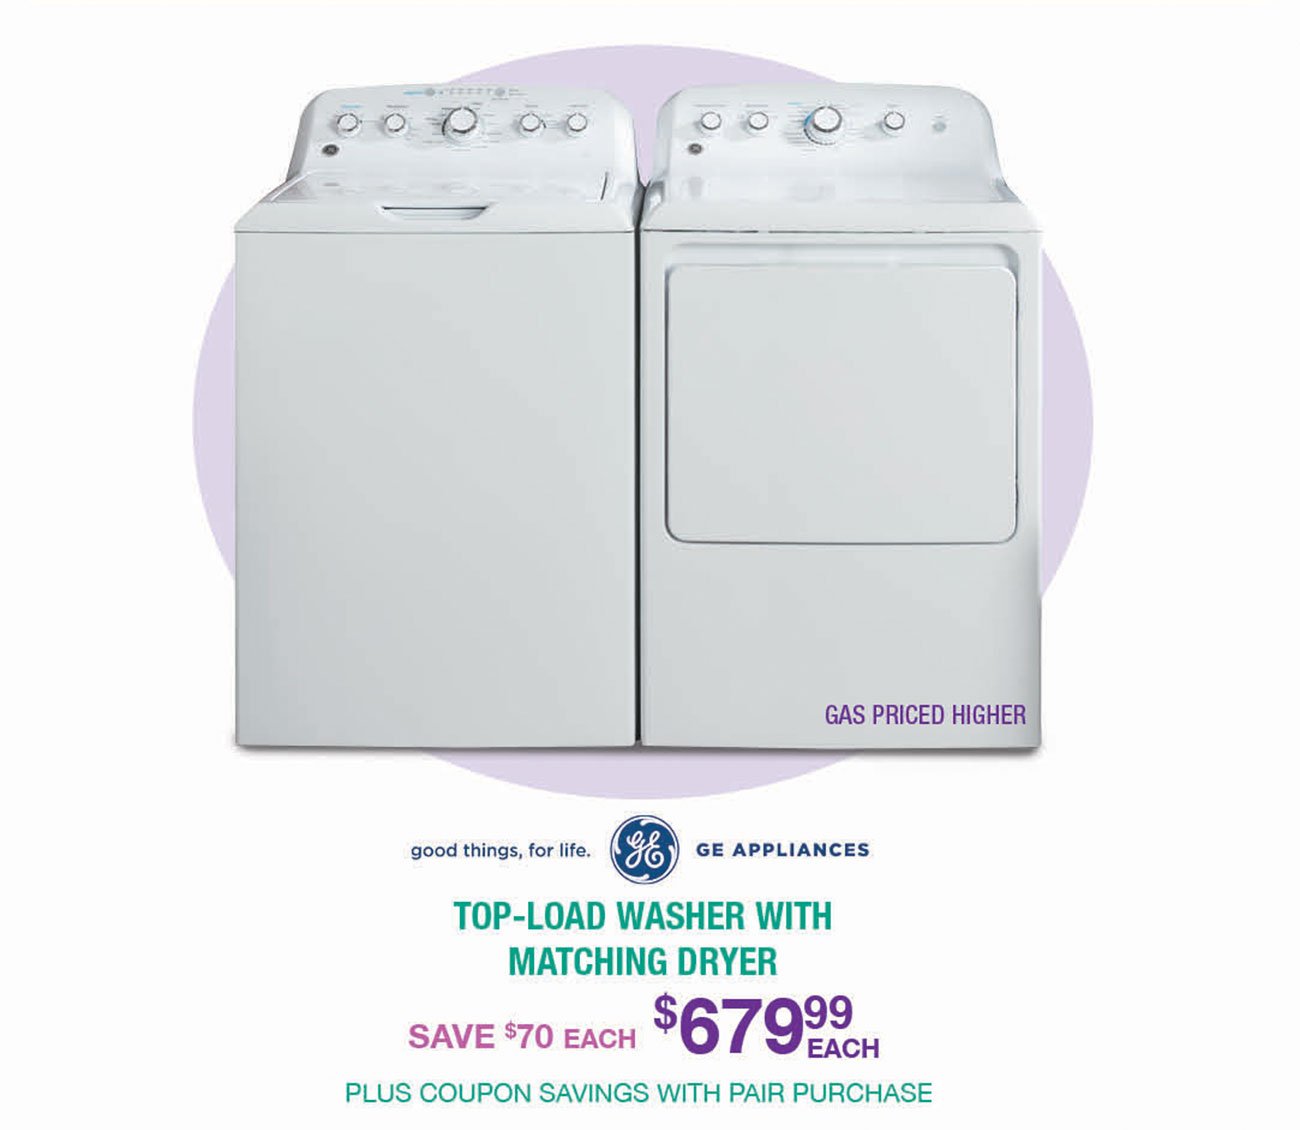 GE-Top-Load-Washer-Dryer-UIRV